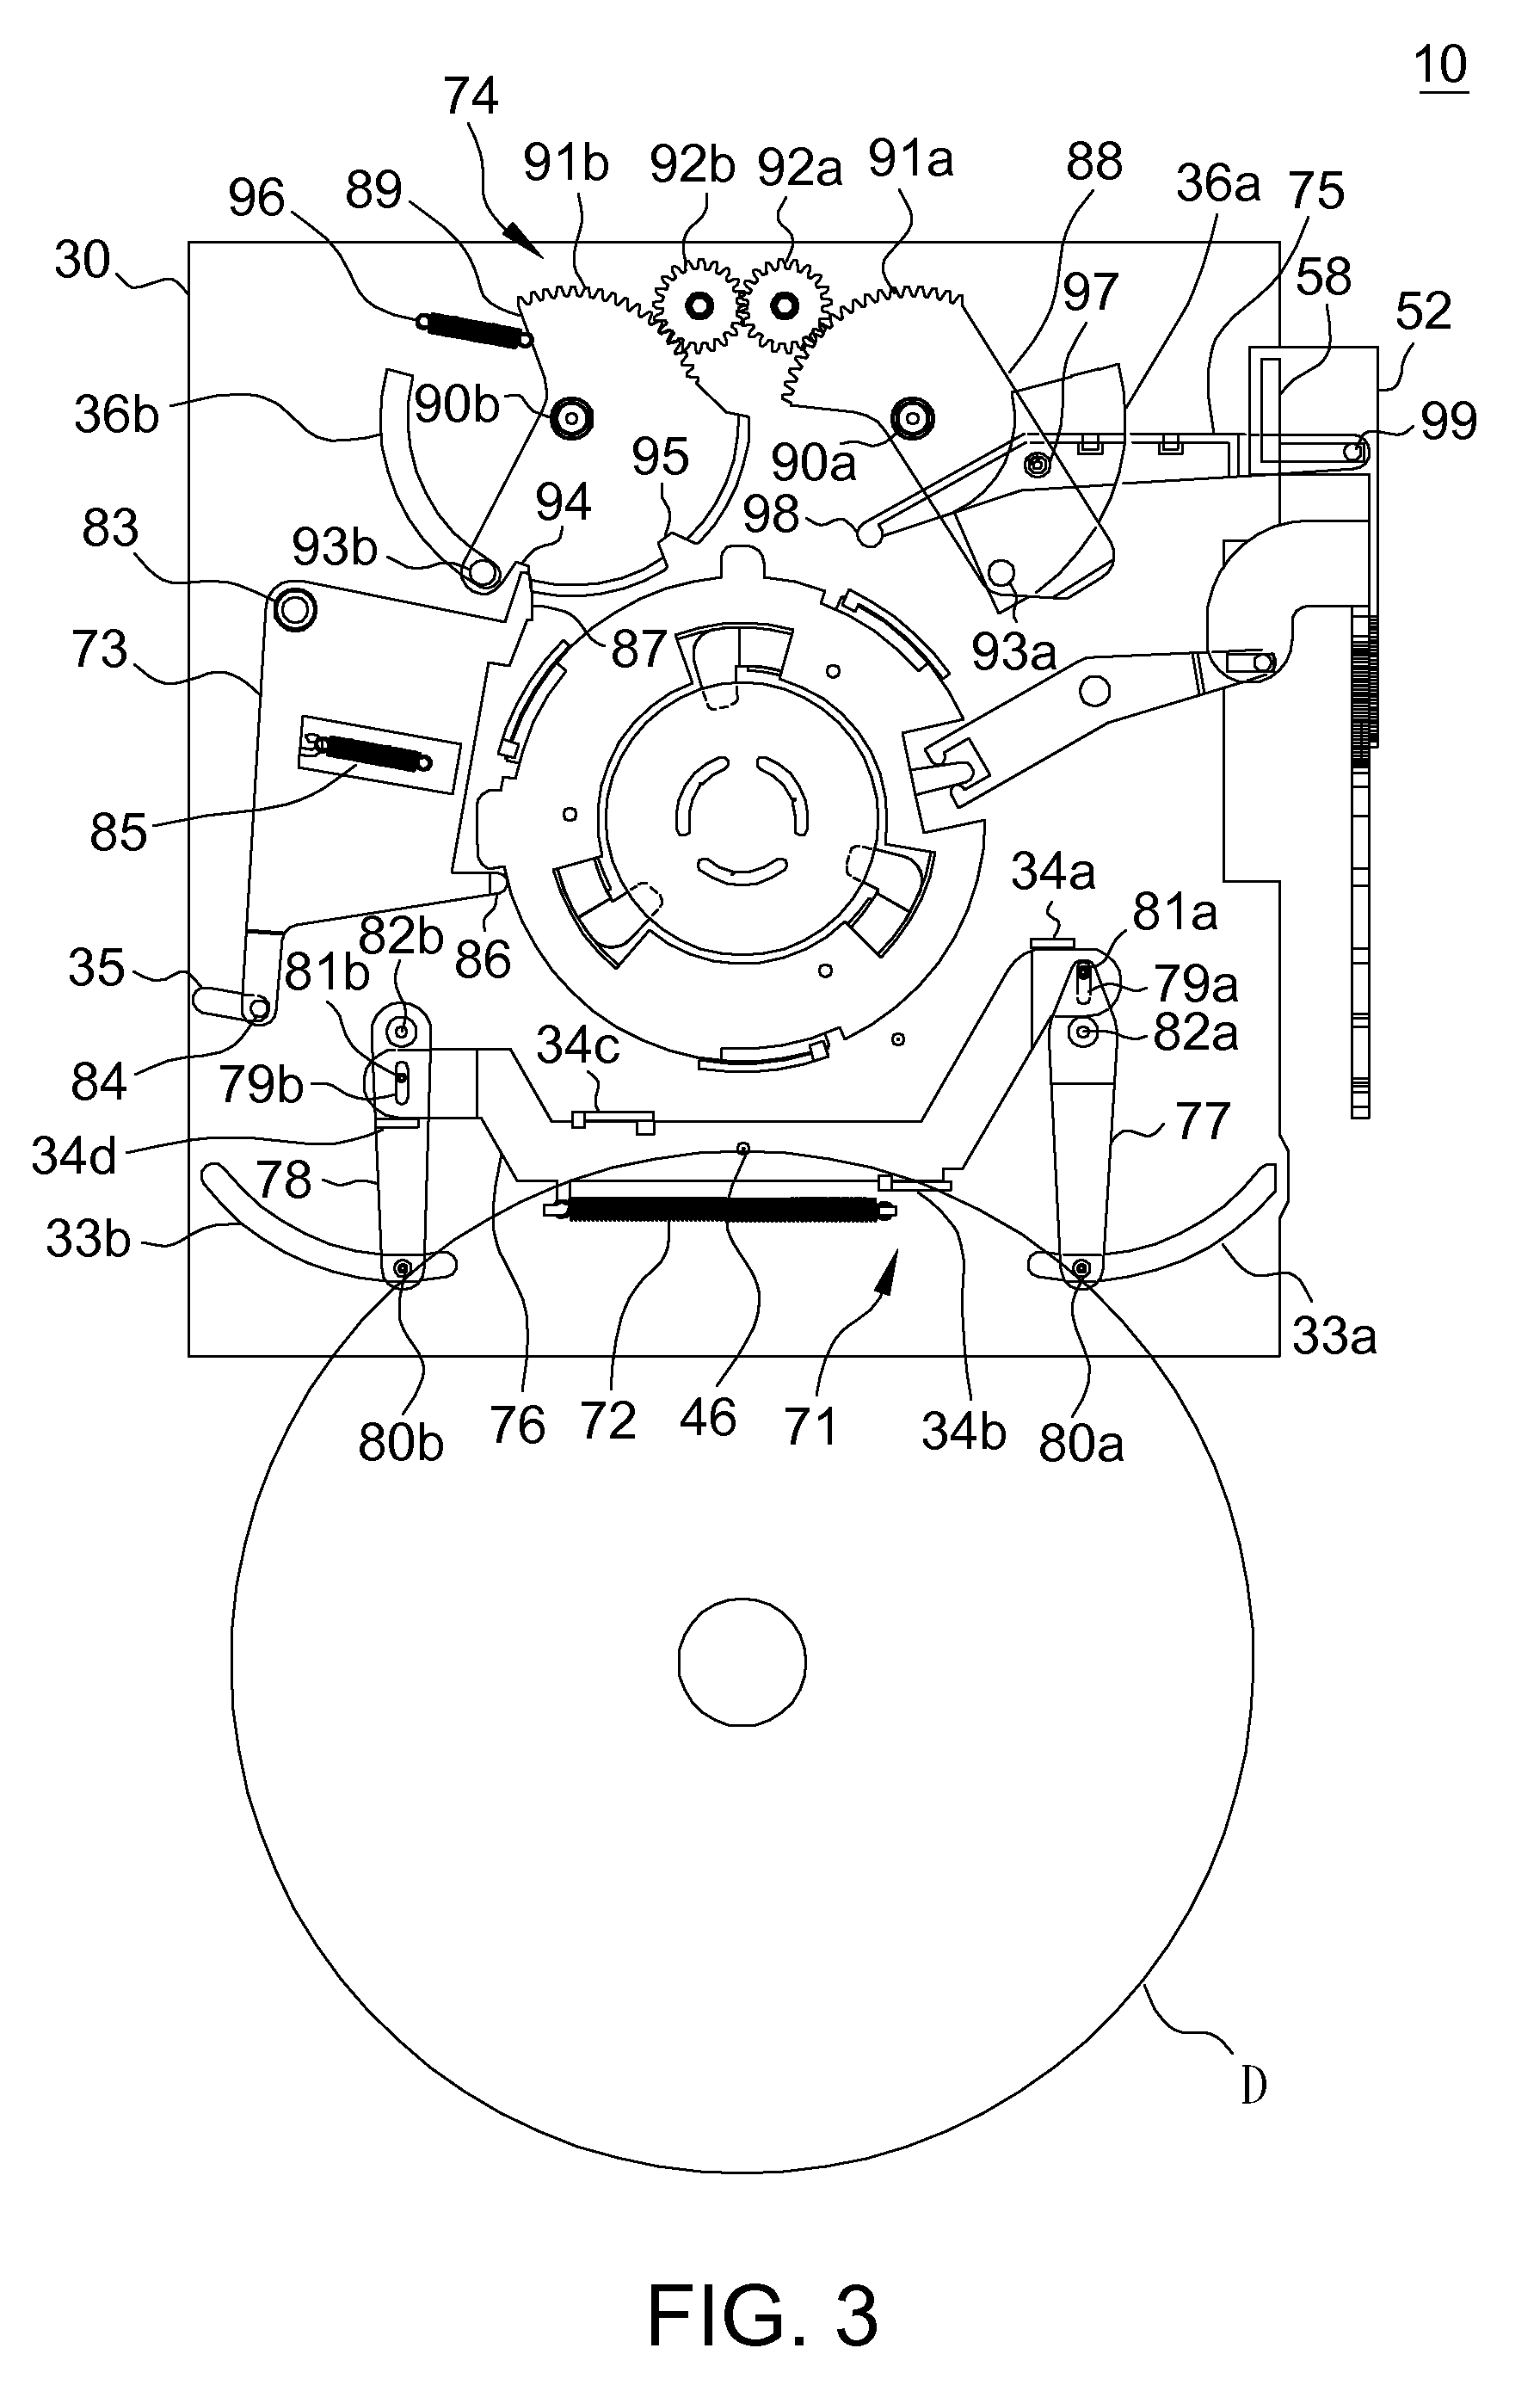 Slot-in optical disk drive